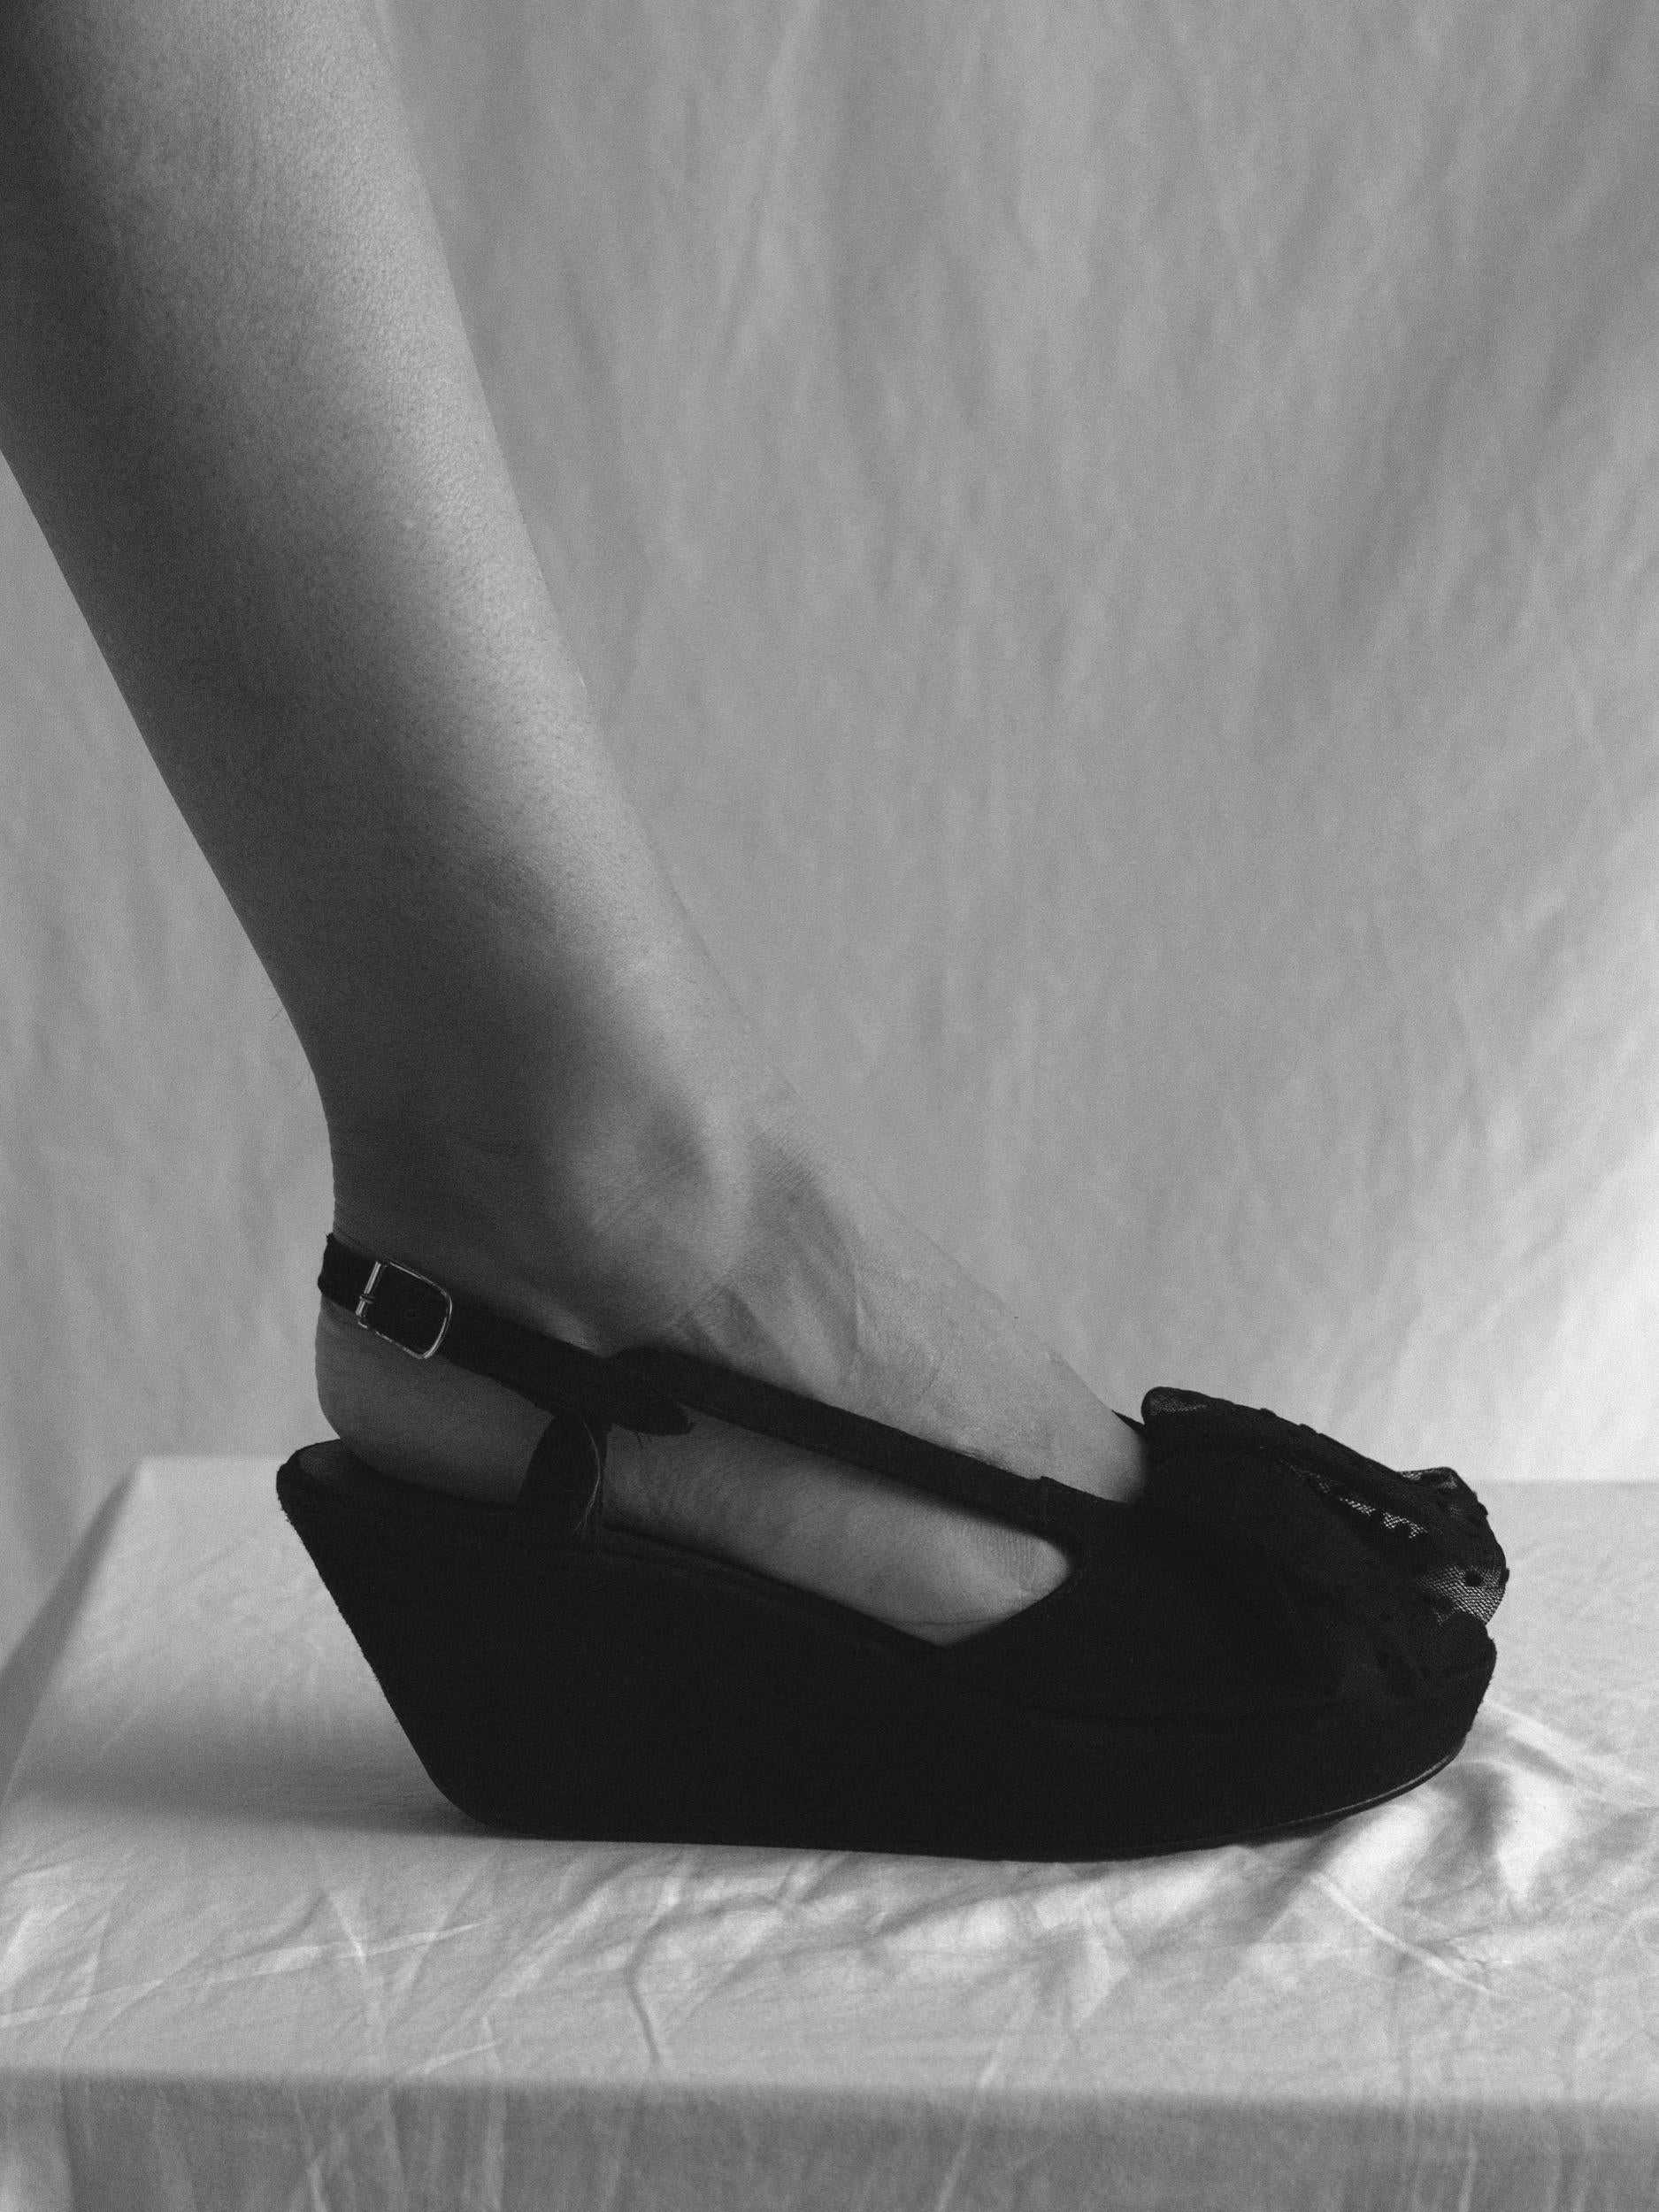 Stephane Kélian Platform Wedge
1990's
3 Inch Platform Heel 
Tulle Polka Dot Detail Covers Peep Toe 
Buckle Ankle Strap Detail
Size equivalent to US 7/7.5
Upper in great condition, soles shows moderate wear
Suede show some wear. but is deep black and